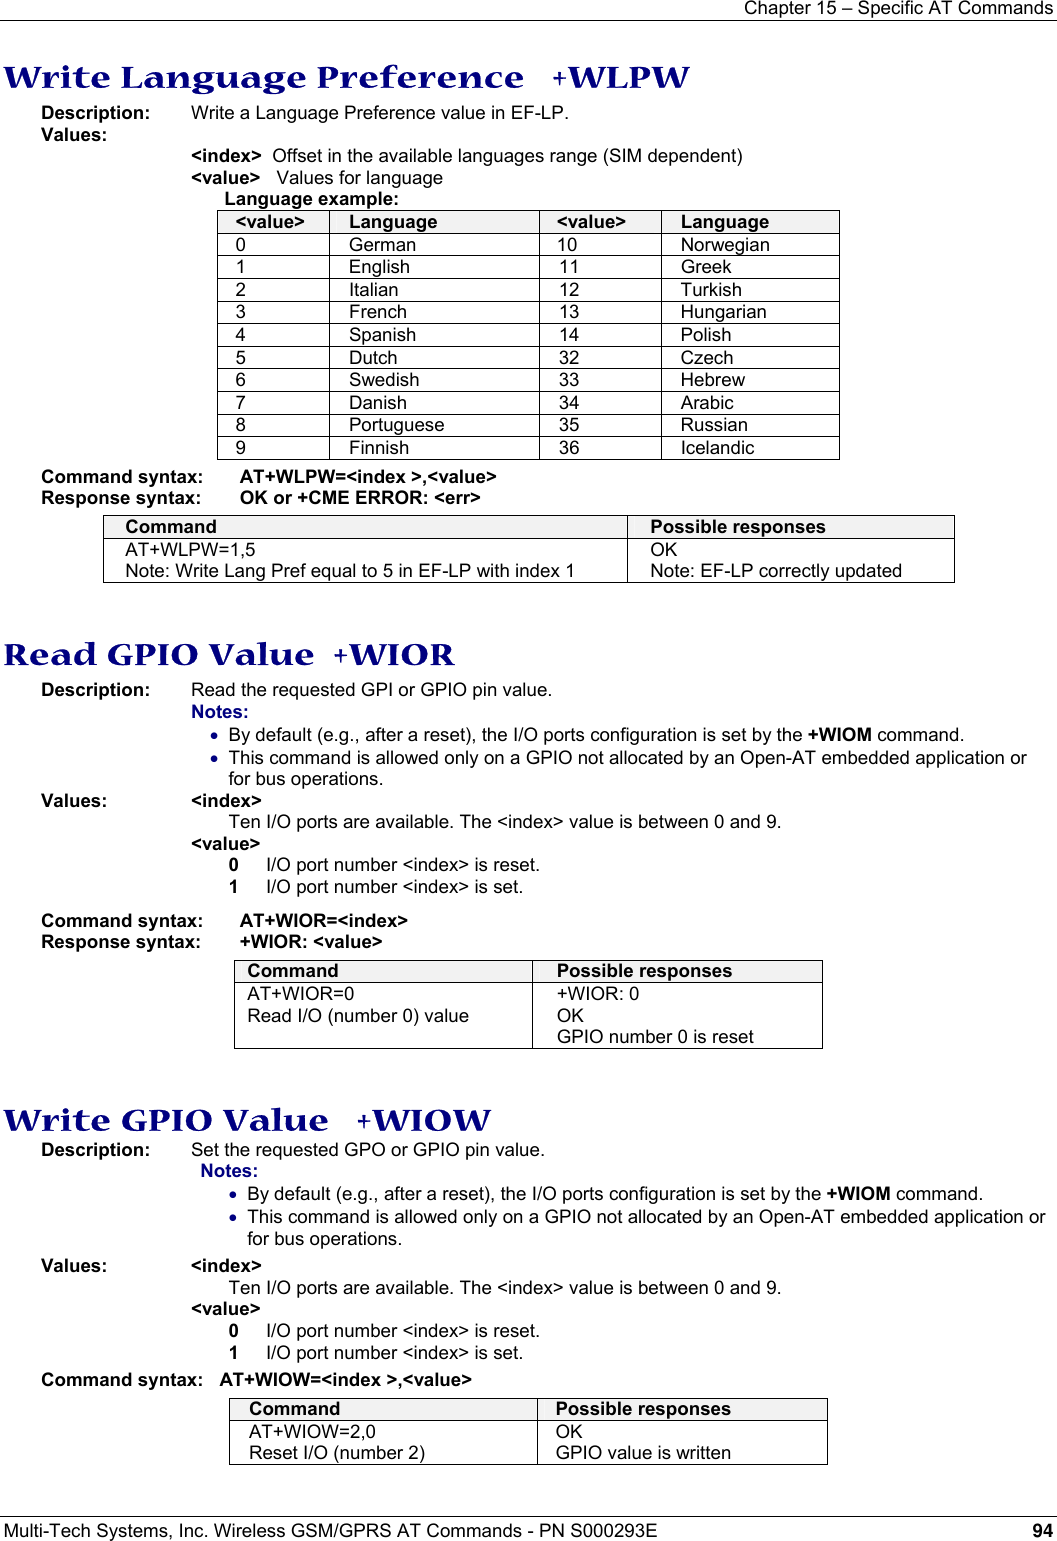 Chapter 15 – Specific AT Commands  Multi-Tech Systems, Inc. Wireless GSM/GPRS AT Commands - PN S000293E 94  Write Language Preference   +WLPW Description:   Write a Language Preference value in EF-LP. Values:  &lt;index&gt;  Offset in the available languages range (SIM dependent) &lt;value&gt;   Values for language  Language example: &lt;value&gt;  Language  &lt;value&gt;  Language 0 German 10 Norwegian 1 English 11 Greek 2 Italian  12 Turkish 3 French  13 Hungarian 4 Spanish  14 Polish 5 Dutch  32 Czech 6 Swedish  33 Hebrew 7 Danish  34 Arabic 8 Portuguese  35 Russian 9 Finnish  36 Icelandic Command syntax:  AT+WLPW=&lt;index &gt;,&lt;value&gt; Response syntax:  OK or +CME ERROR: &lt;err&gt; Command  Possible responses AT+WLPW=1,5 Note: Write Lang Pref equal to 5 in EF-LP with index 1 OK Note: EF-LP correctly updated   Read GPIO Value  +WIOR Description:  Read the requested GPI or GPIO pin value.  Notes:  • By default (e.g., after a reset), the I/O ports configuration is set by the +WIOM command. • This command is allowed only on a GPIO not allocated by an Open-AT embedded application or for bus operations. Values: &lt;index&gt;  Ten I/O ports are available. The &lt;index&gt; value is between 0 and 9. &lt;value&gt;  0  I/O port number &lt;index&gt; is reset. 1  I/O port number &lt;index&gt; is set. Command syntax:  AT+WIOR=&lt;index&gt; Response syntax:  +WIOR: &lt;value&gt; Command  Possible responses AT+WIOR=0 Read I/O (number 0) value +WIOR: 0 OK GPIO number 0 is reset   Write GPIO Value   +WIOW Description:  Set the requested GPO or GPIO pin value. Notes:  • By default (e.g., after a reset), the I/O ports configuration is set by the +WIOM command. • This command is allowed only on a GPIO not allocated by an Open-AT embedded application or for bus operations. Values: &lt;index&gt;    Ten I/O ports are available. The &lt;index&gt; value is between 0 and 9.  &lt;value&gt; 0  I/O port number &lt;index&gt; is reset. 1  I/O port number &lt;index&gt; is set. Command syntax:   AT+WIOW=&lt;index &gt;,&lt;value&gt; Command  Possible responses AT+WIOW=2,0 Reset I/O (number 2) OK GPIO value is written  